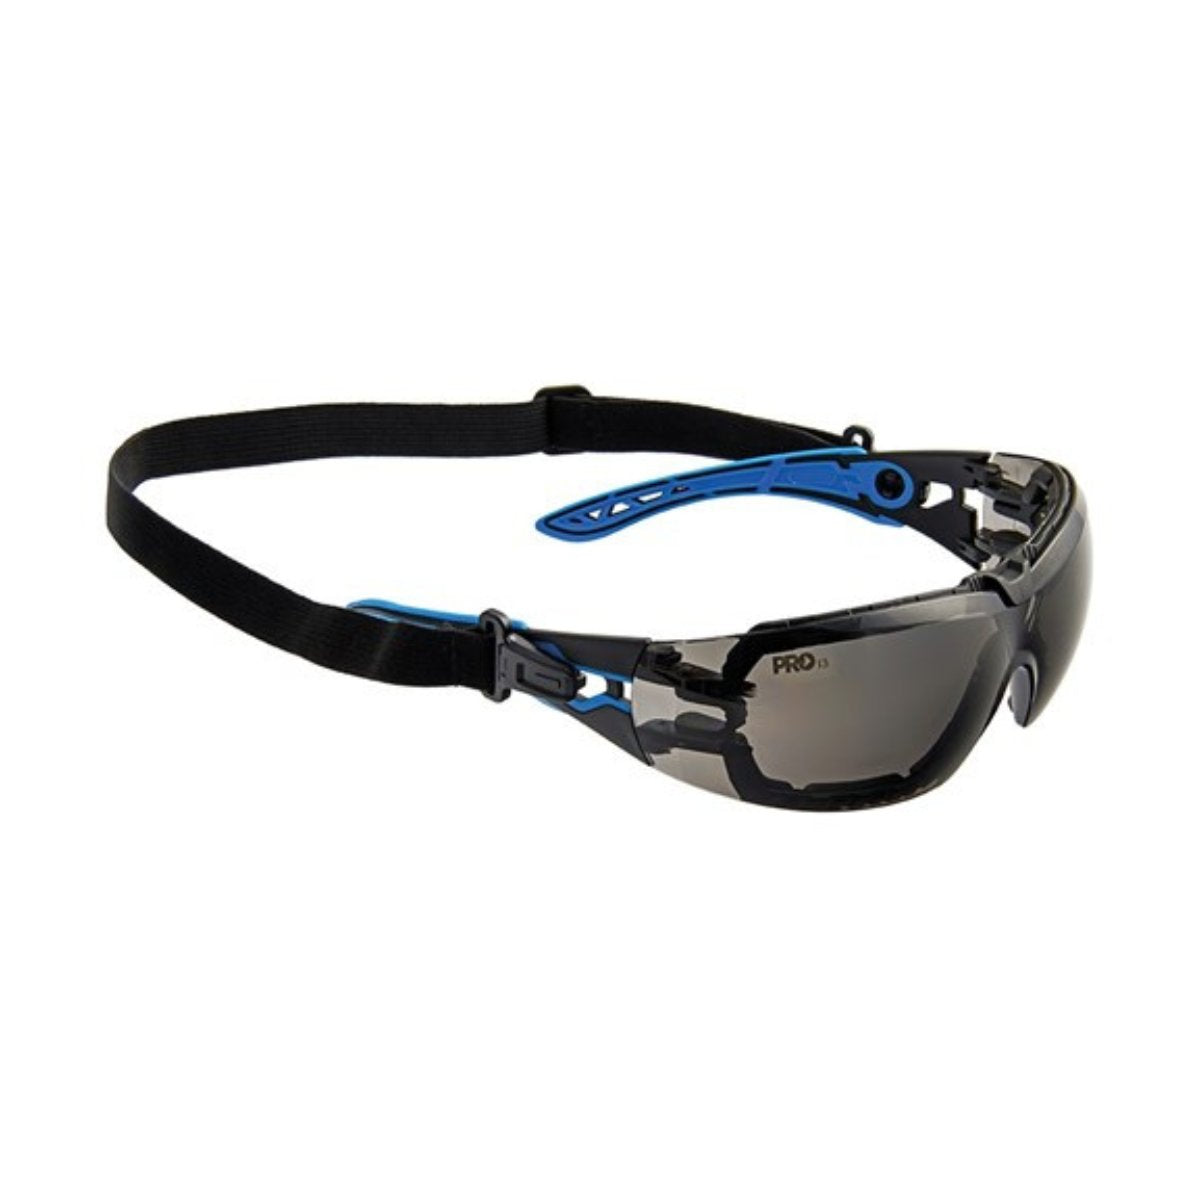 ProChoice Proteus 5 Safety Glasses, Strap Included (Pack of 12)